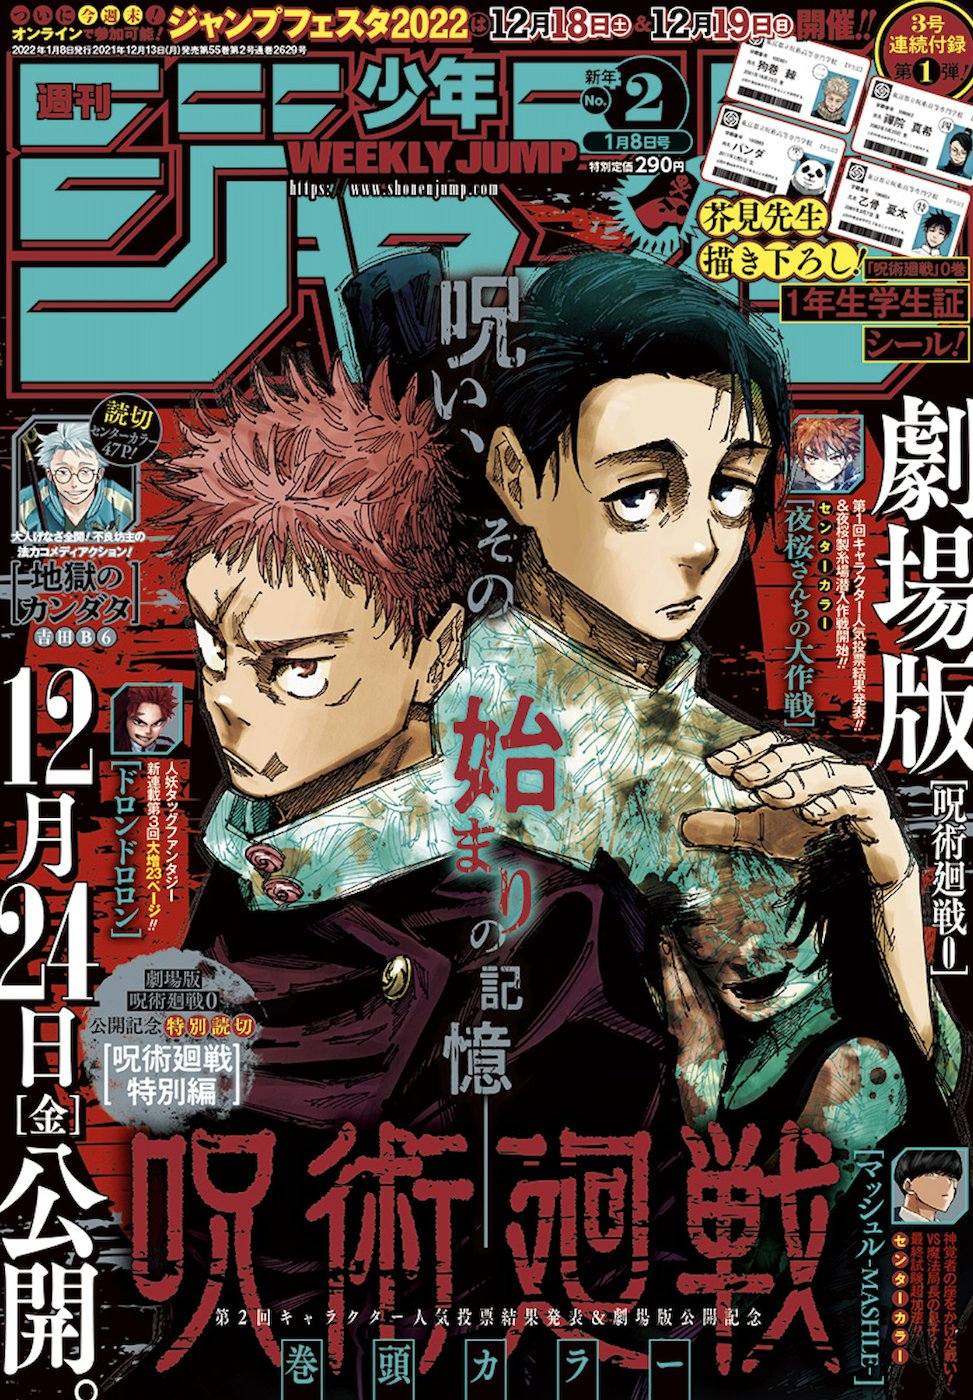 Análise: TOC Weekly Shonen Jump #44 (Ano 2018). - Analyse It